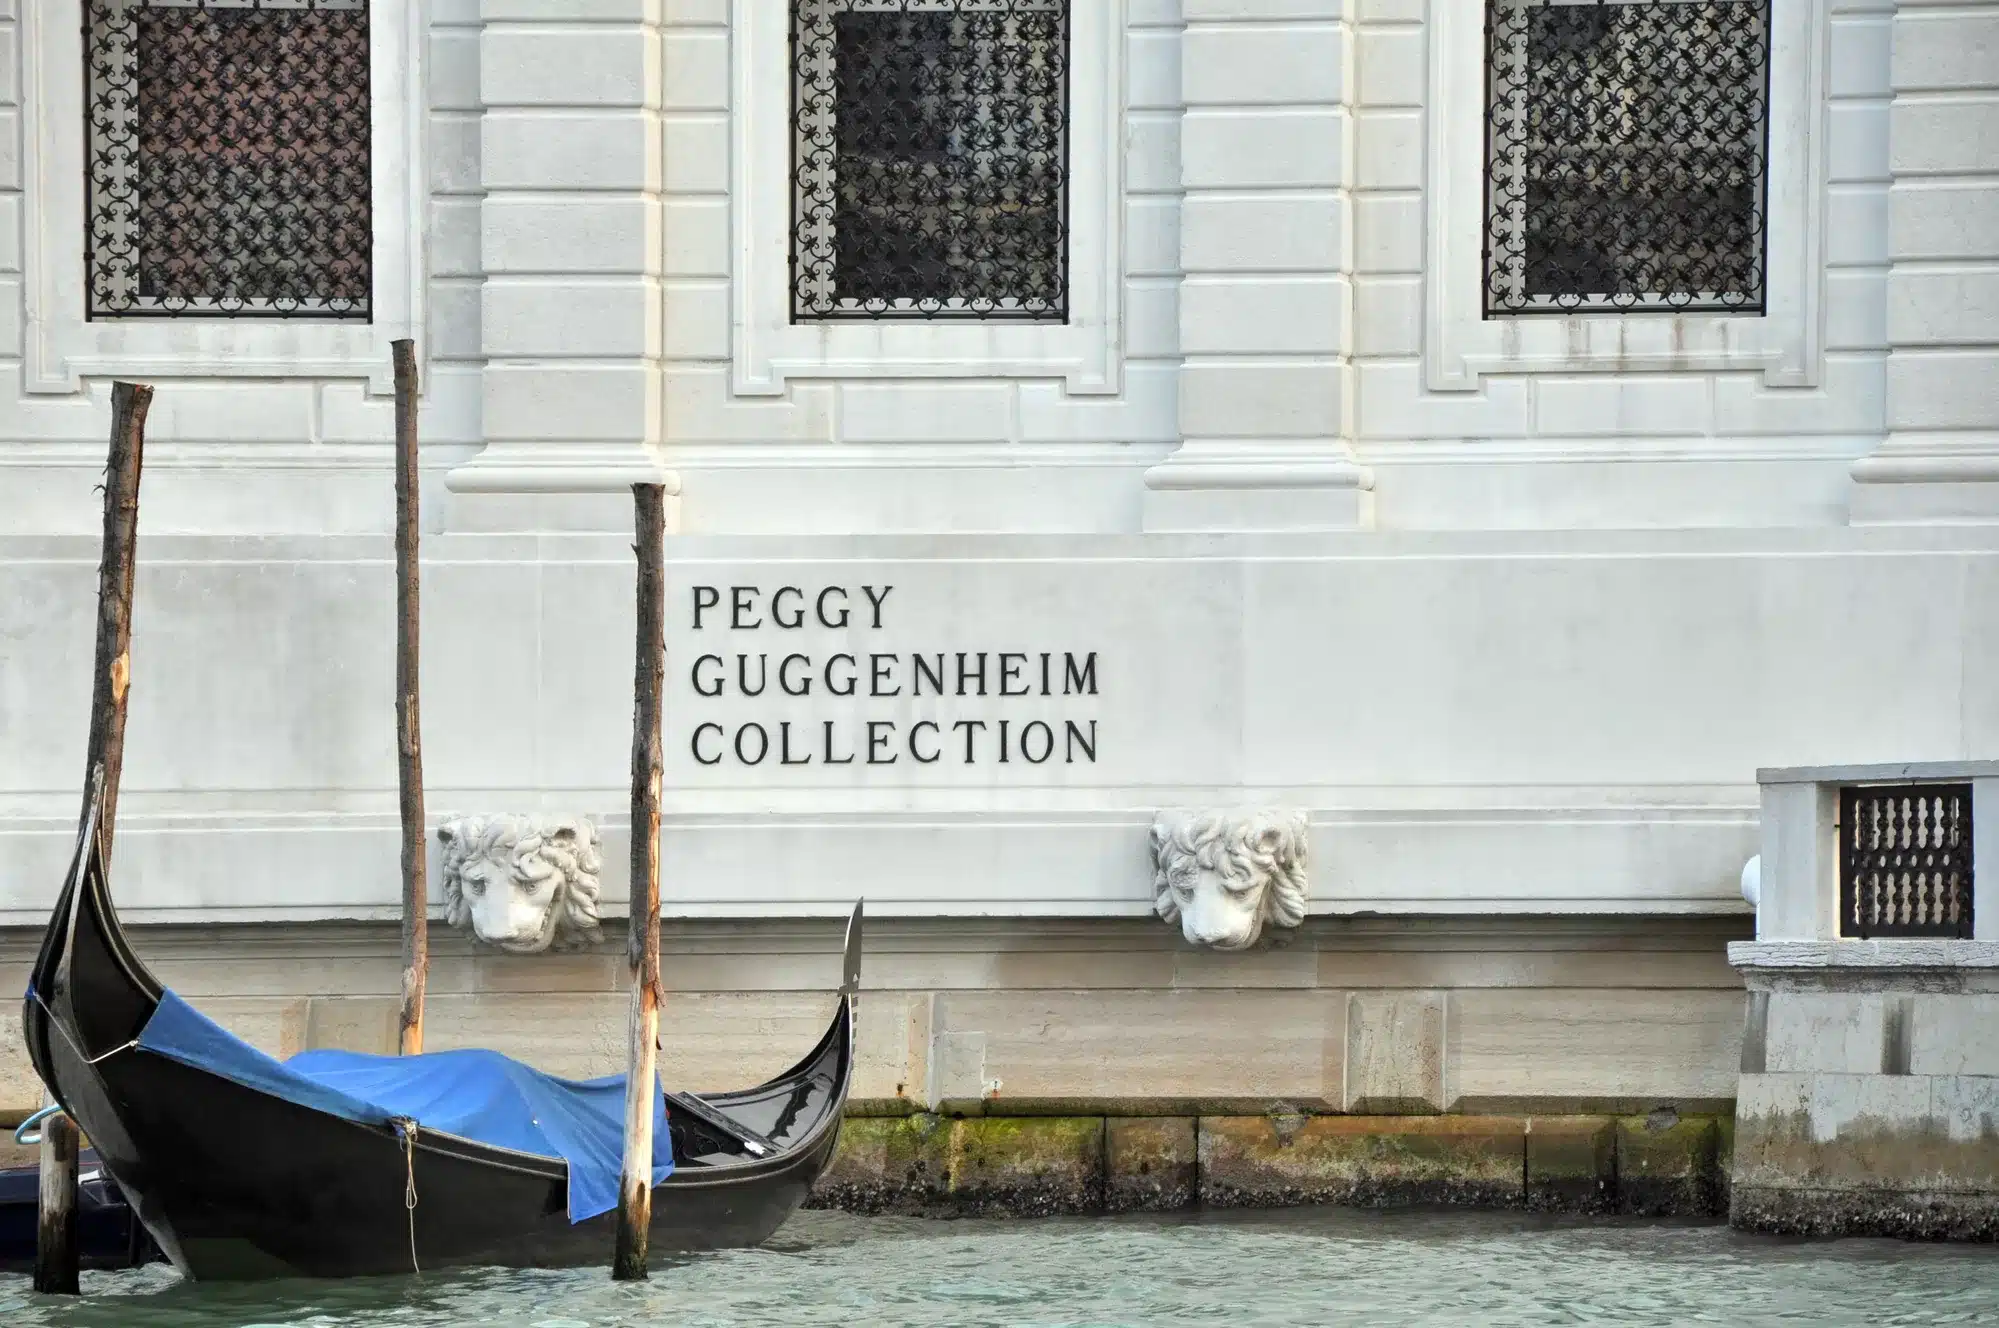 The Peggy Guggenheim Collection in Venice